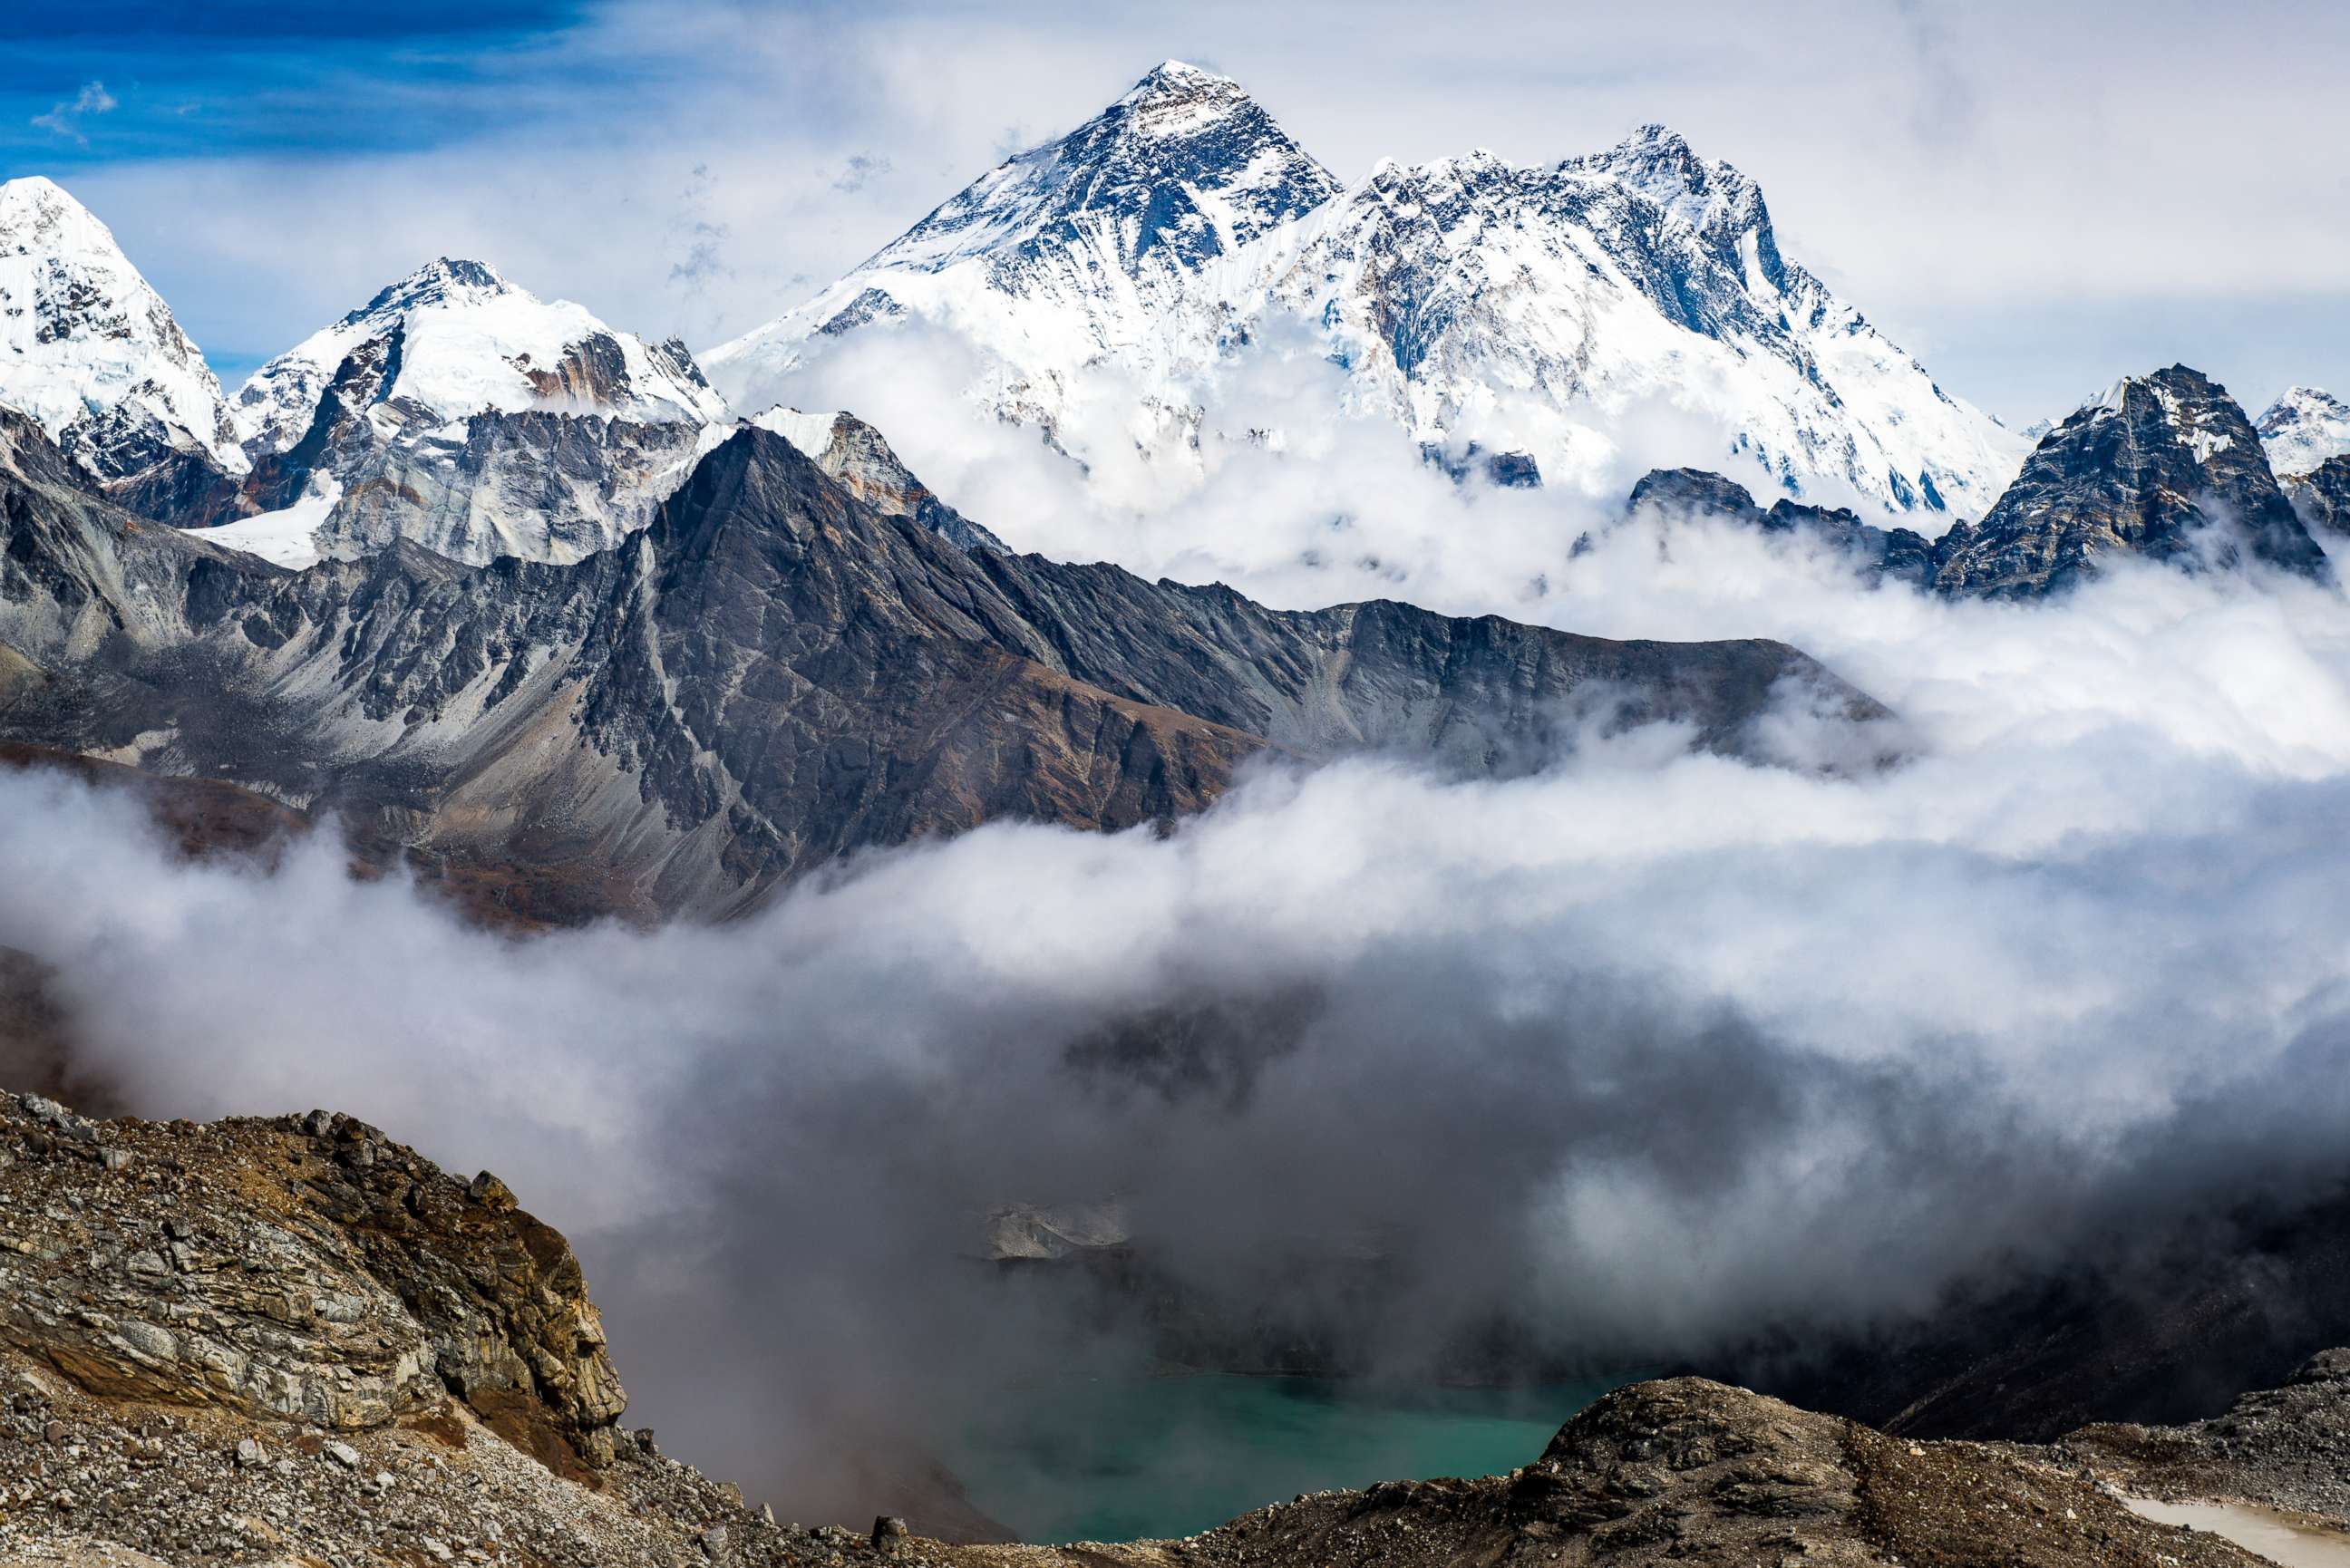 PHOTO: Everest the highest mountains in the world.